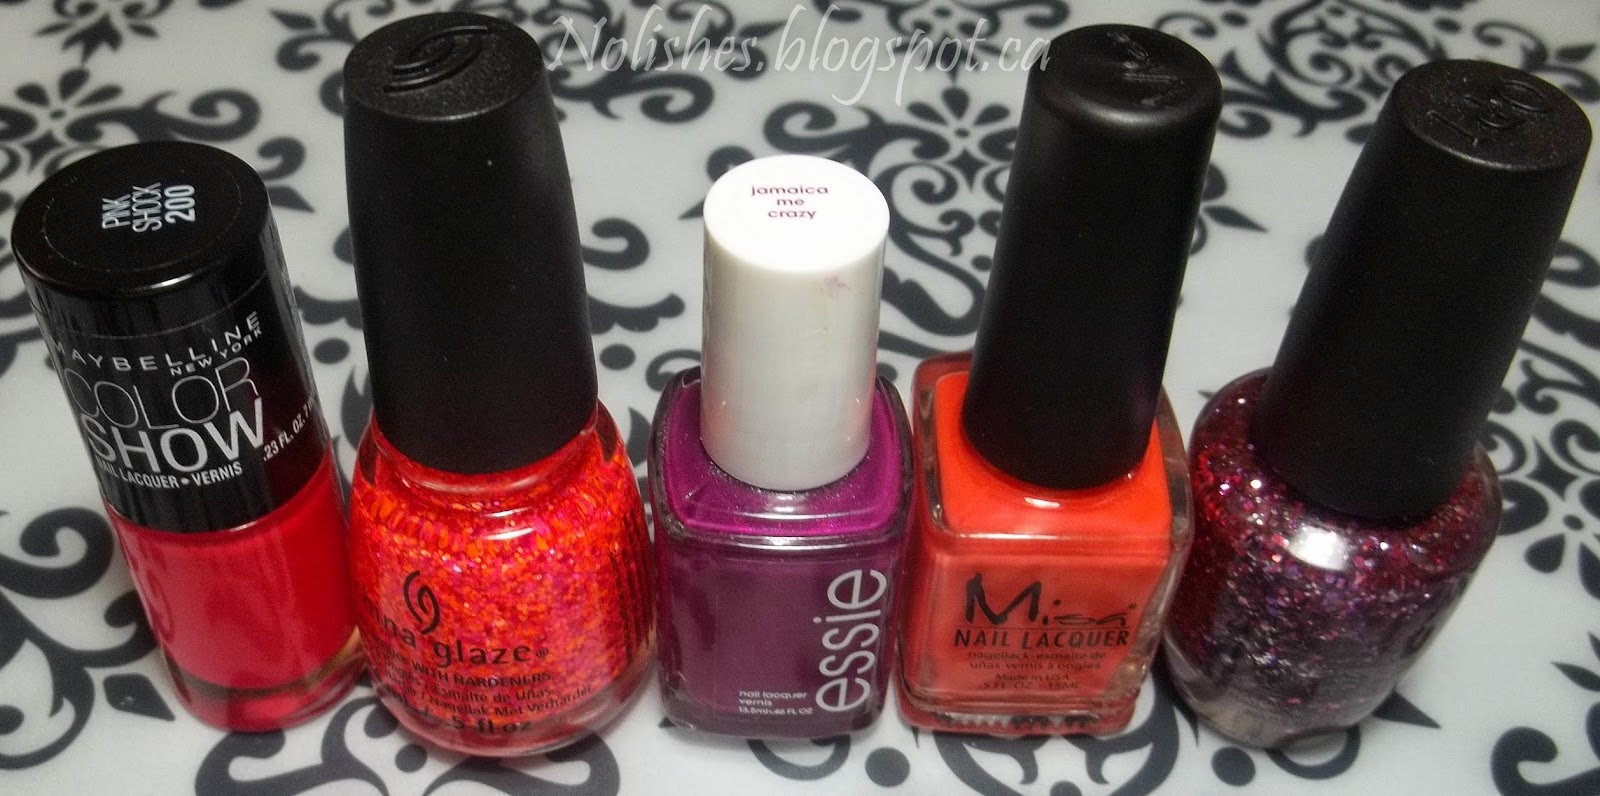 Maybelline Color Show ‘Pink Shock’, China Glaze ‘Let the Beat Drop’, Essie ‘Jamaica Me Crazy’, Misa ‘BubblePop’, and OPI ‘Blush Hour’